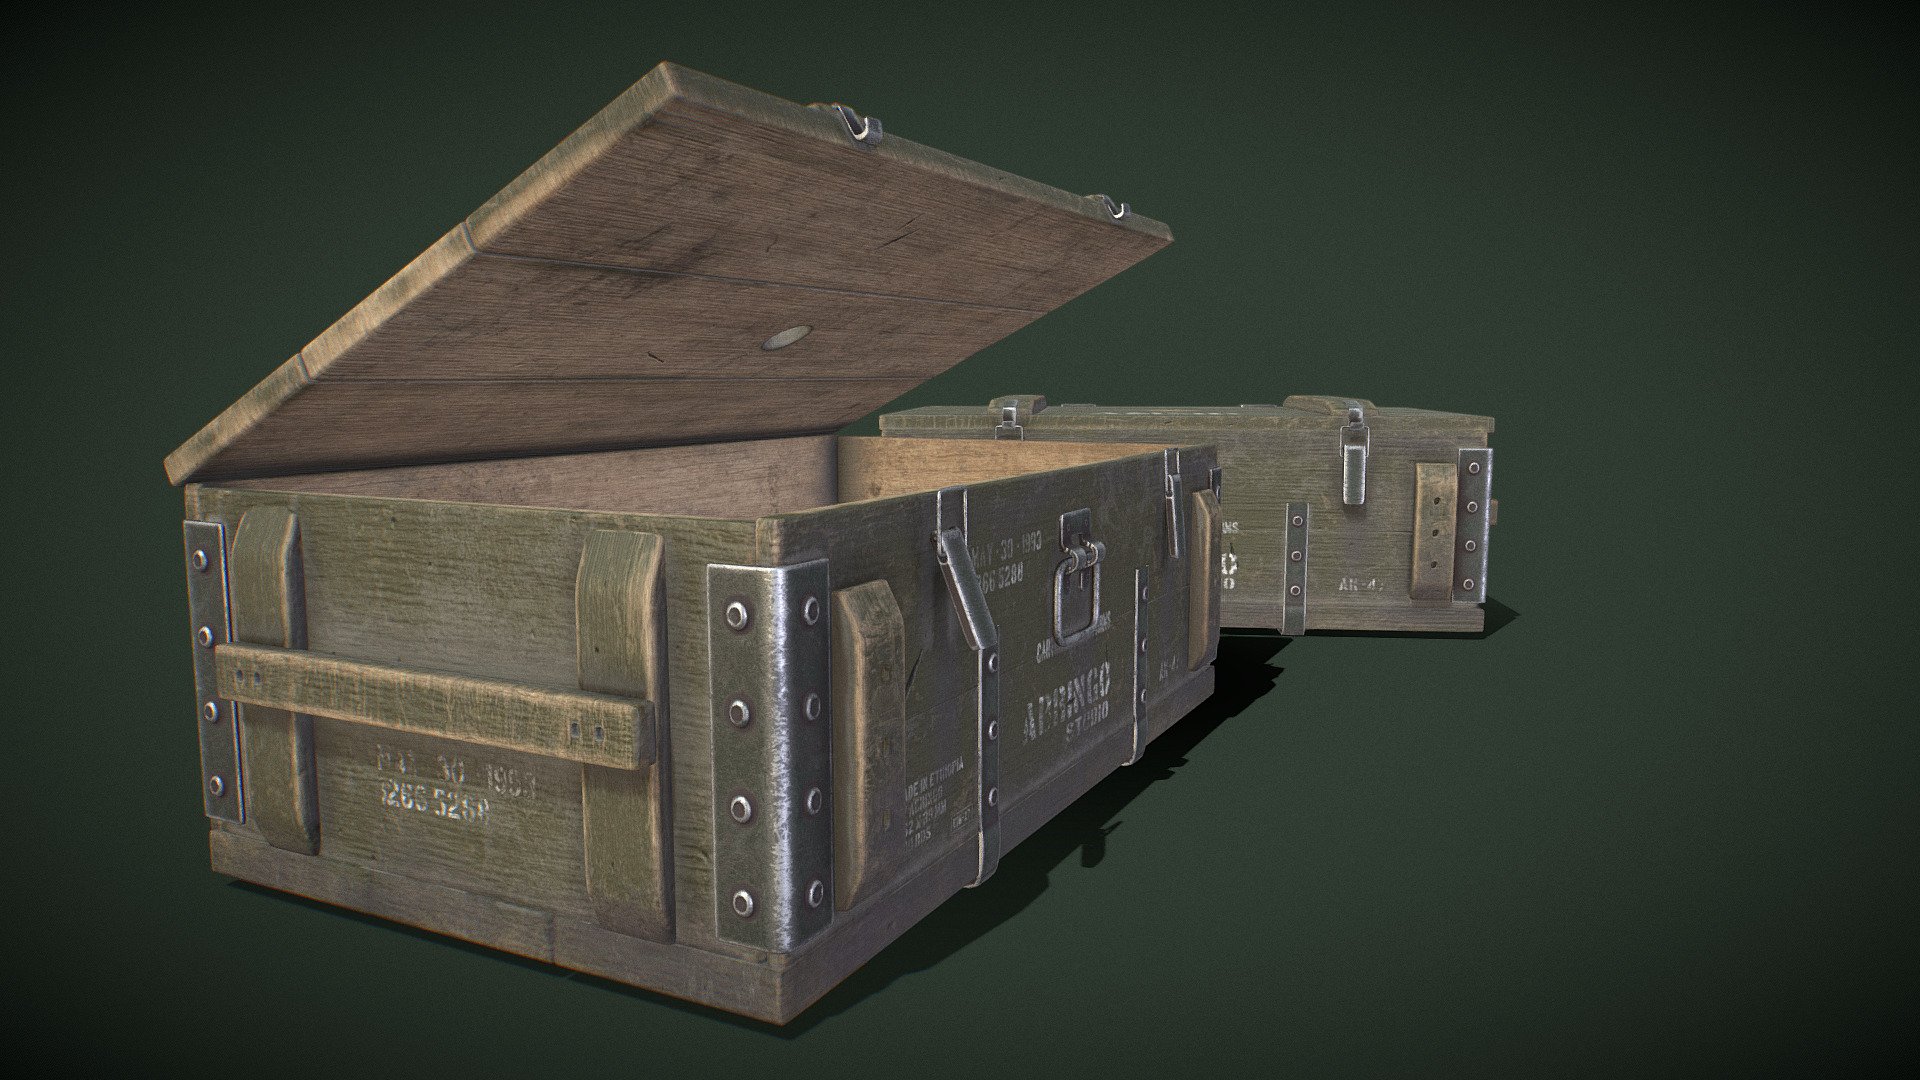 Modeling with blender and texturing Adobe substance painter 
Game readdy free asset
Enjoy - Ammunition Boxes - Download Free 3D model by Abringo 3d model